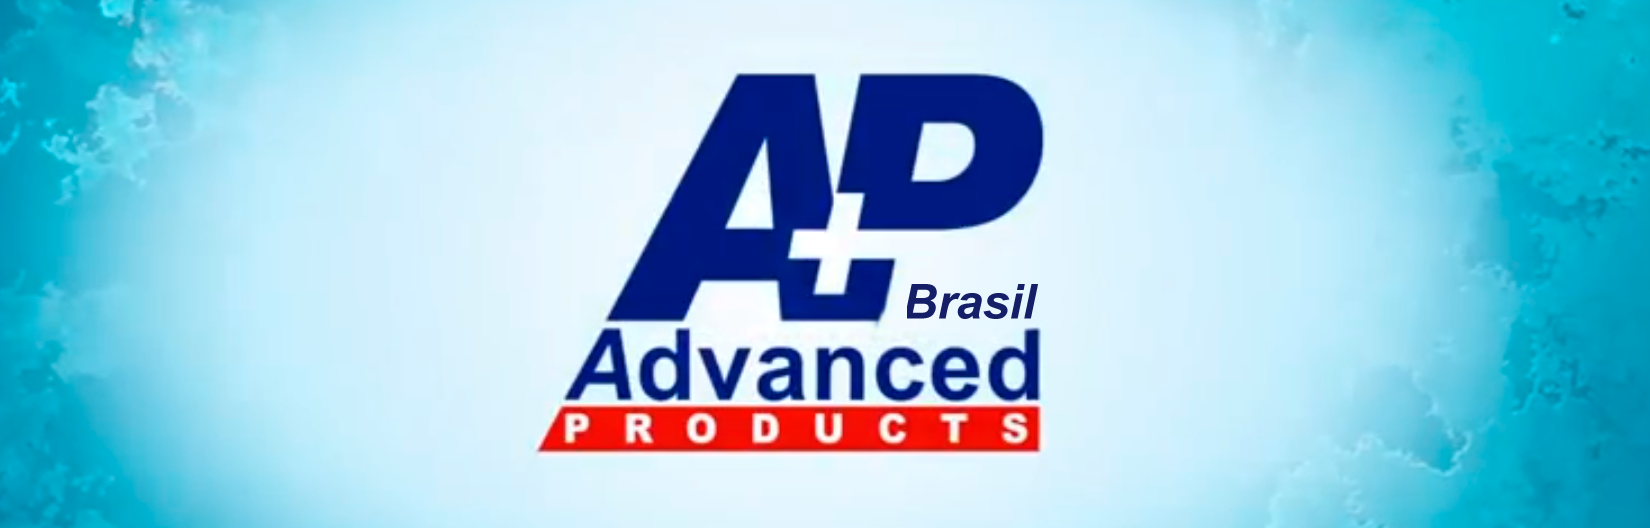 ADVANCED PRODUCTS BRASIL